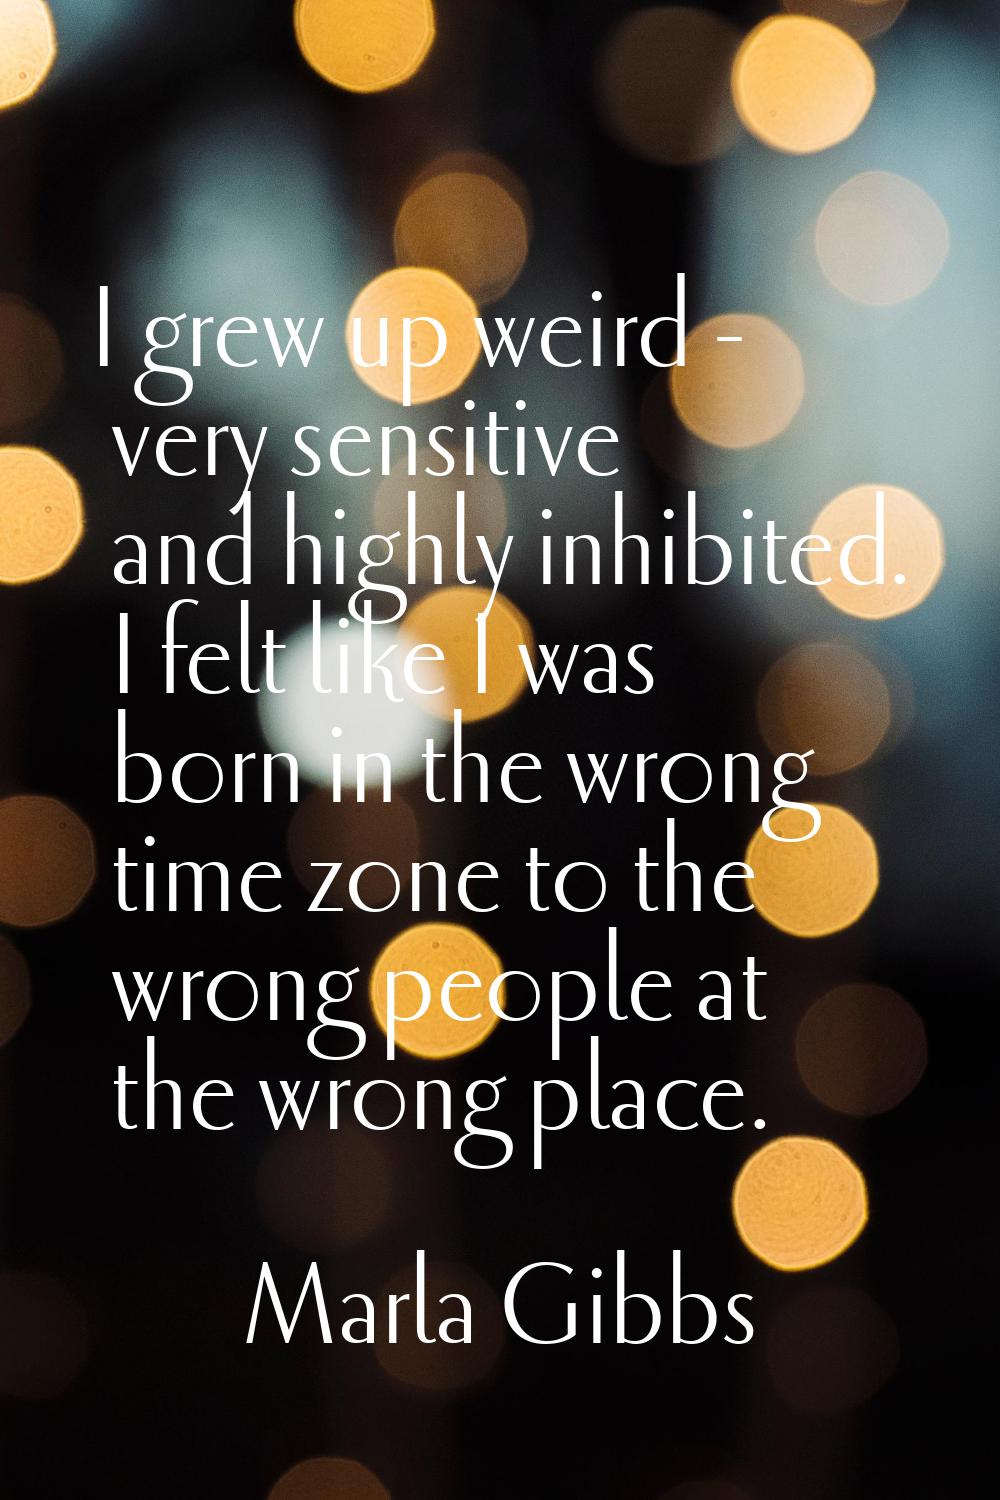 I grew up weird - very sensitive and highly inhibited. I felt like I was born in the wrong time zon